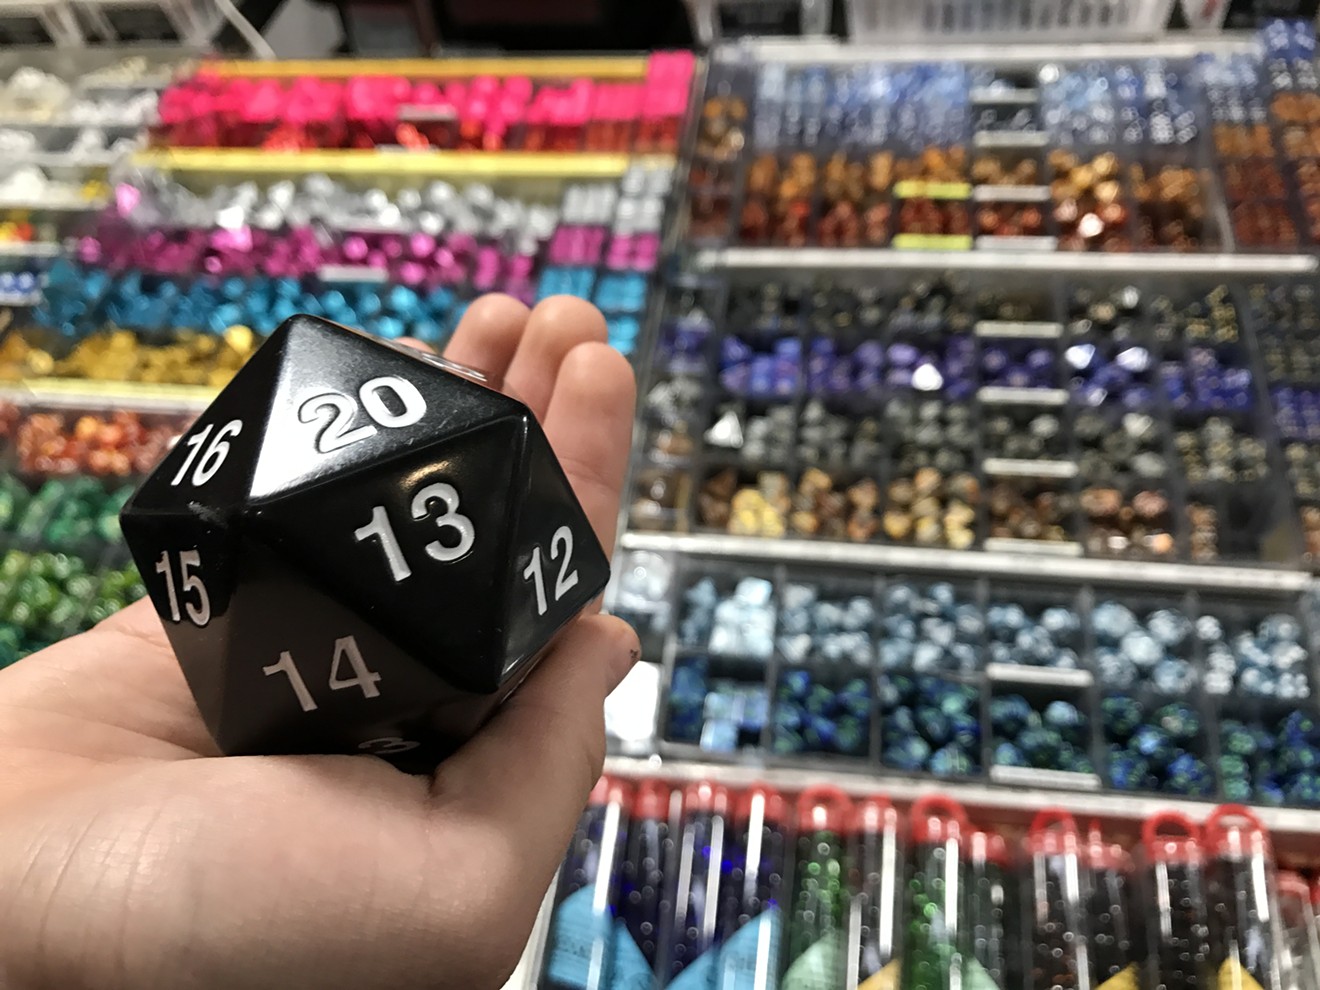 That's not a d20...this is a d20.